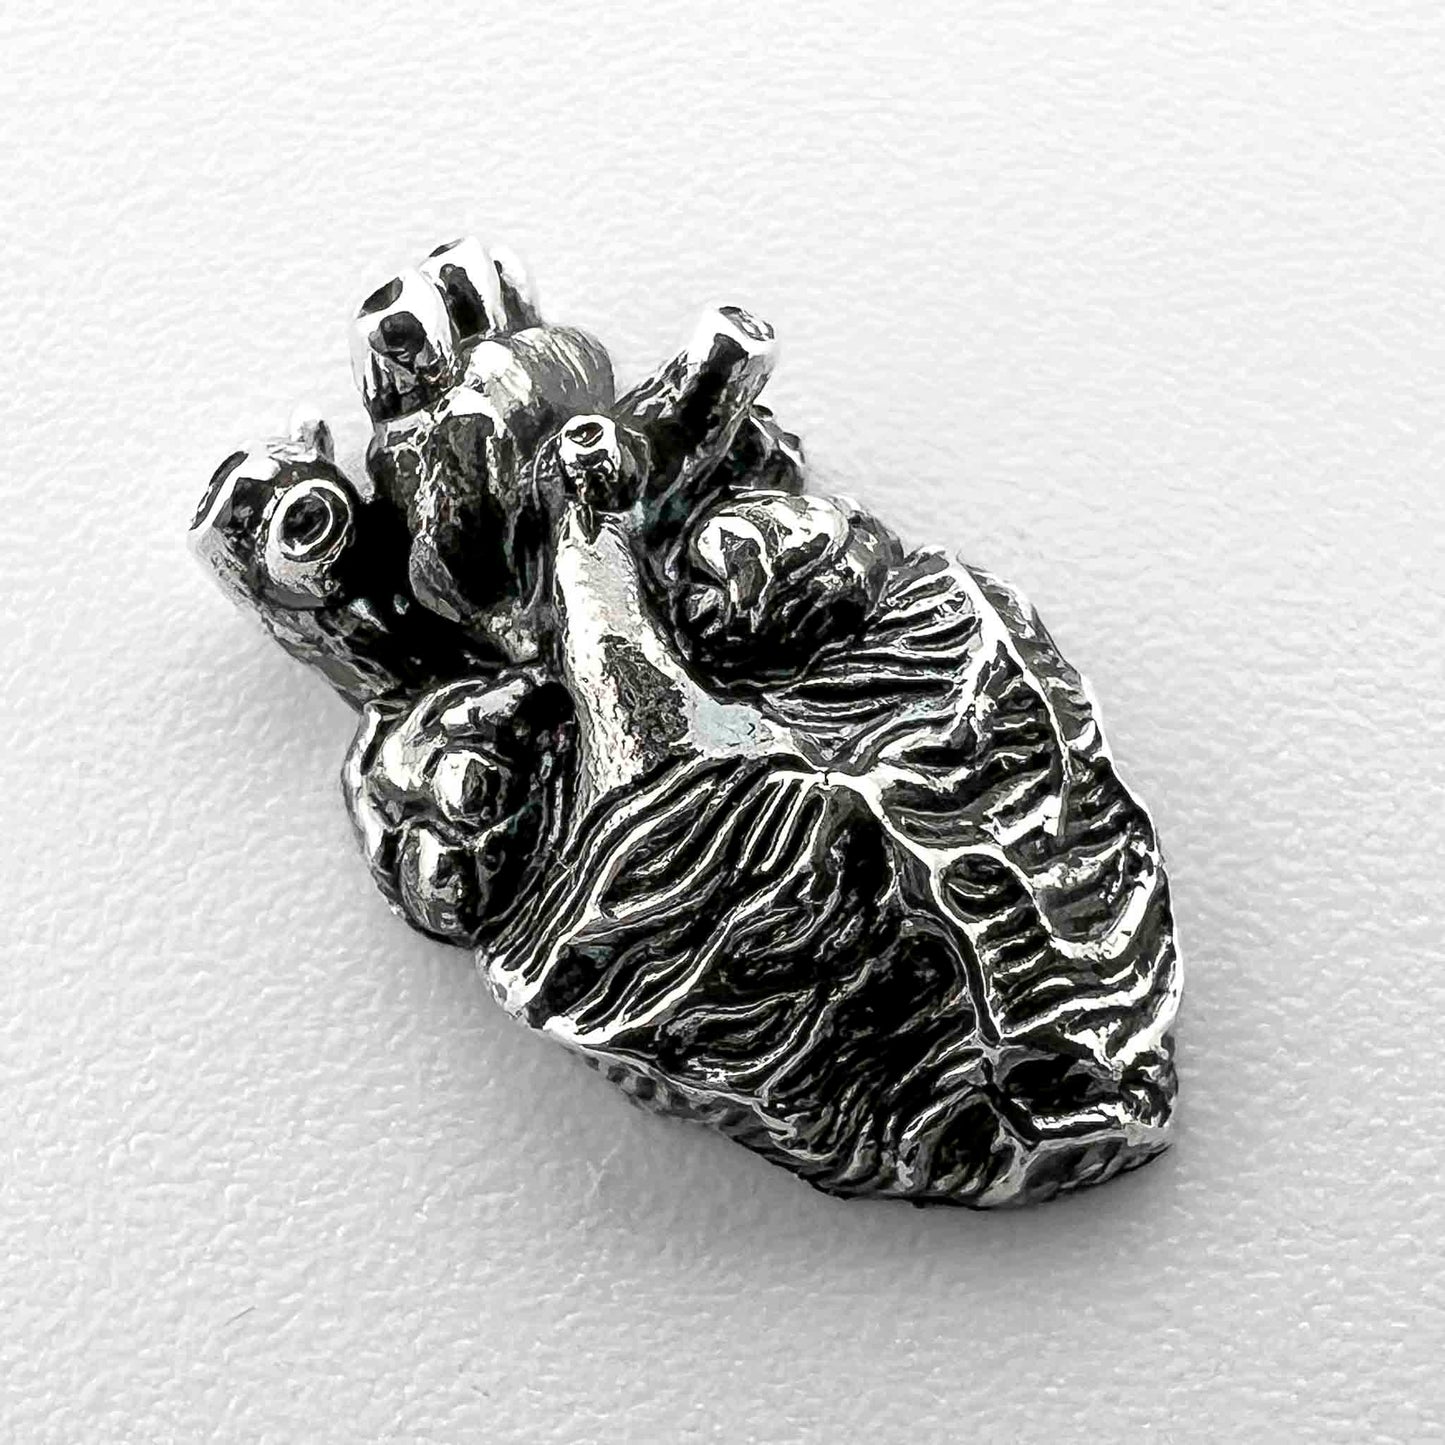 Anatomical Heart Jewelry Finding